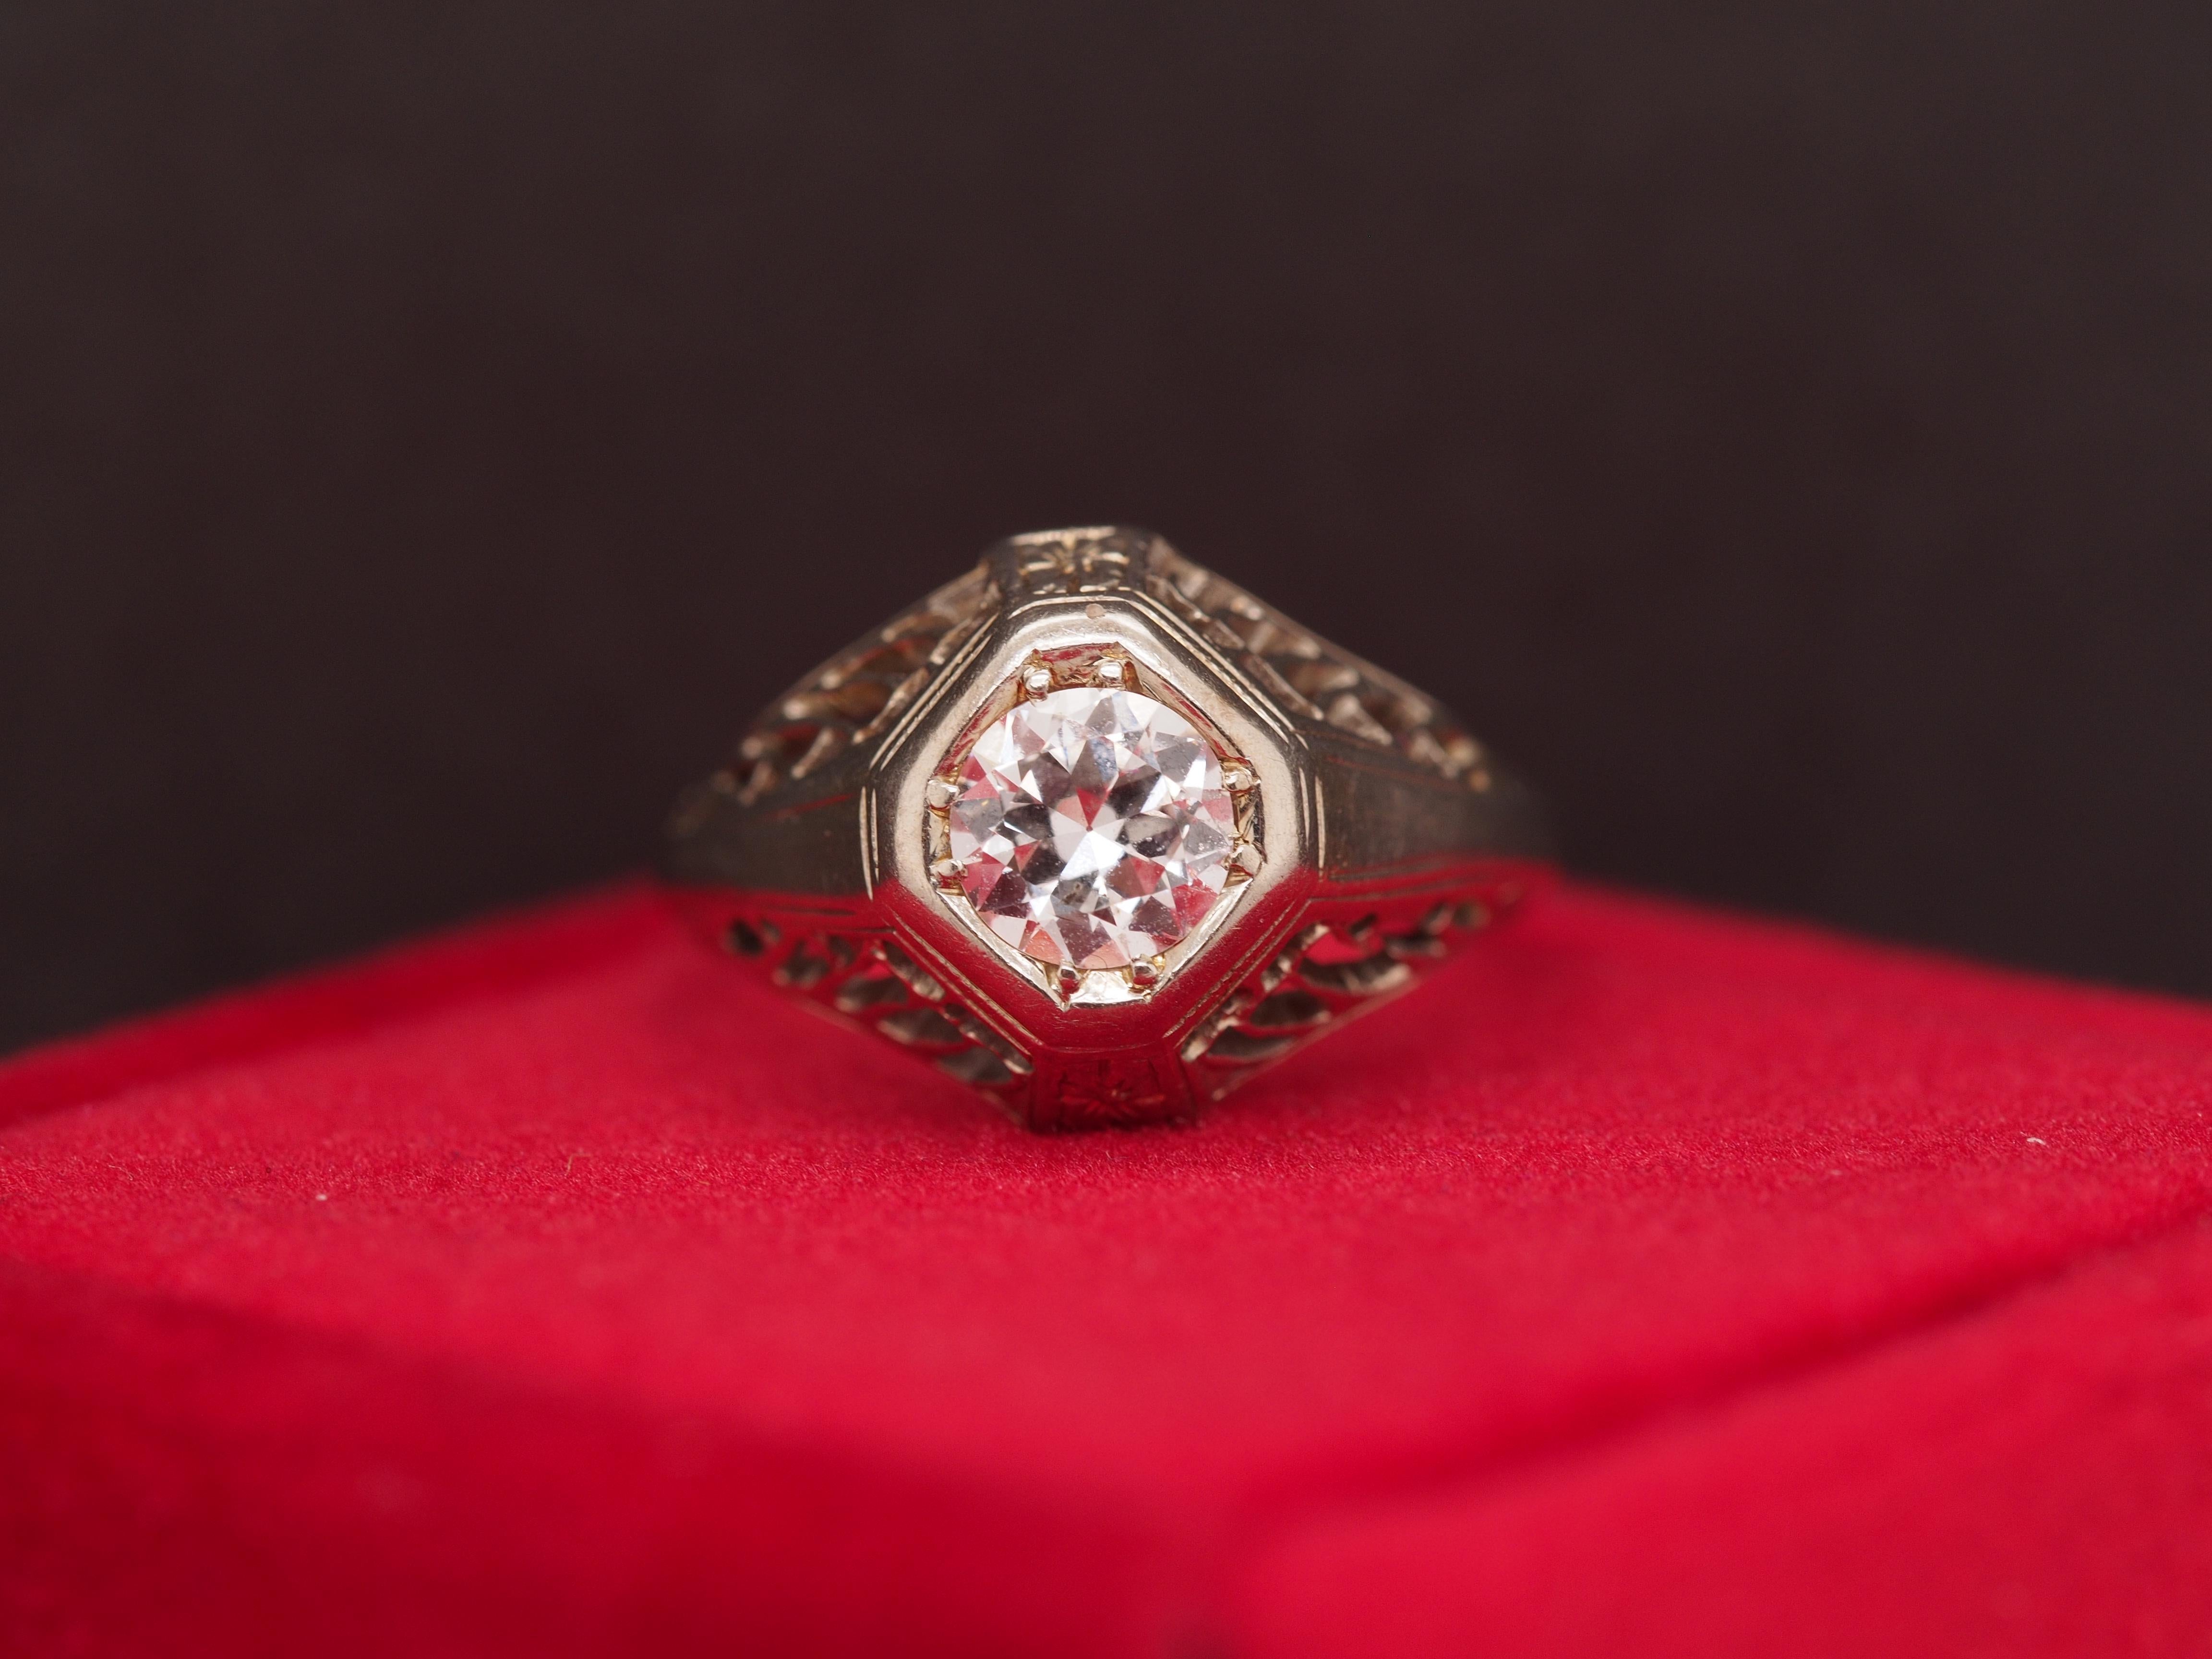 Year: 1930s
Item Details:
Ring Size: 3
Metal Type: 18k white gold [Hallmarked, and Tested]
Weight: 1.9 grams
Diamond Details
Center Diamond: .35ct weight, Old European brilliant shape, F Color, VS Clarity, Natural Diamond.
Band Width: 1.6